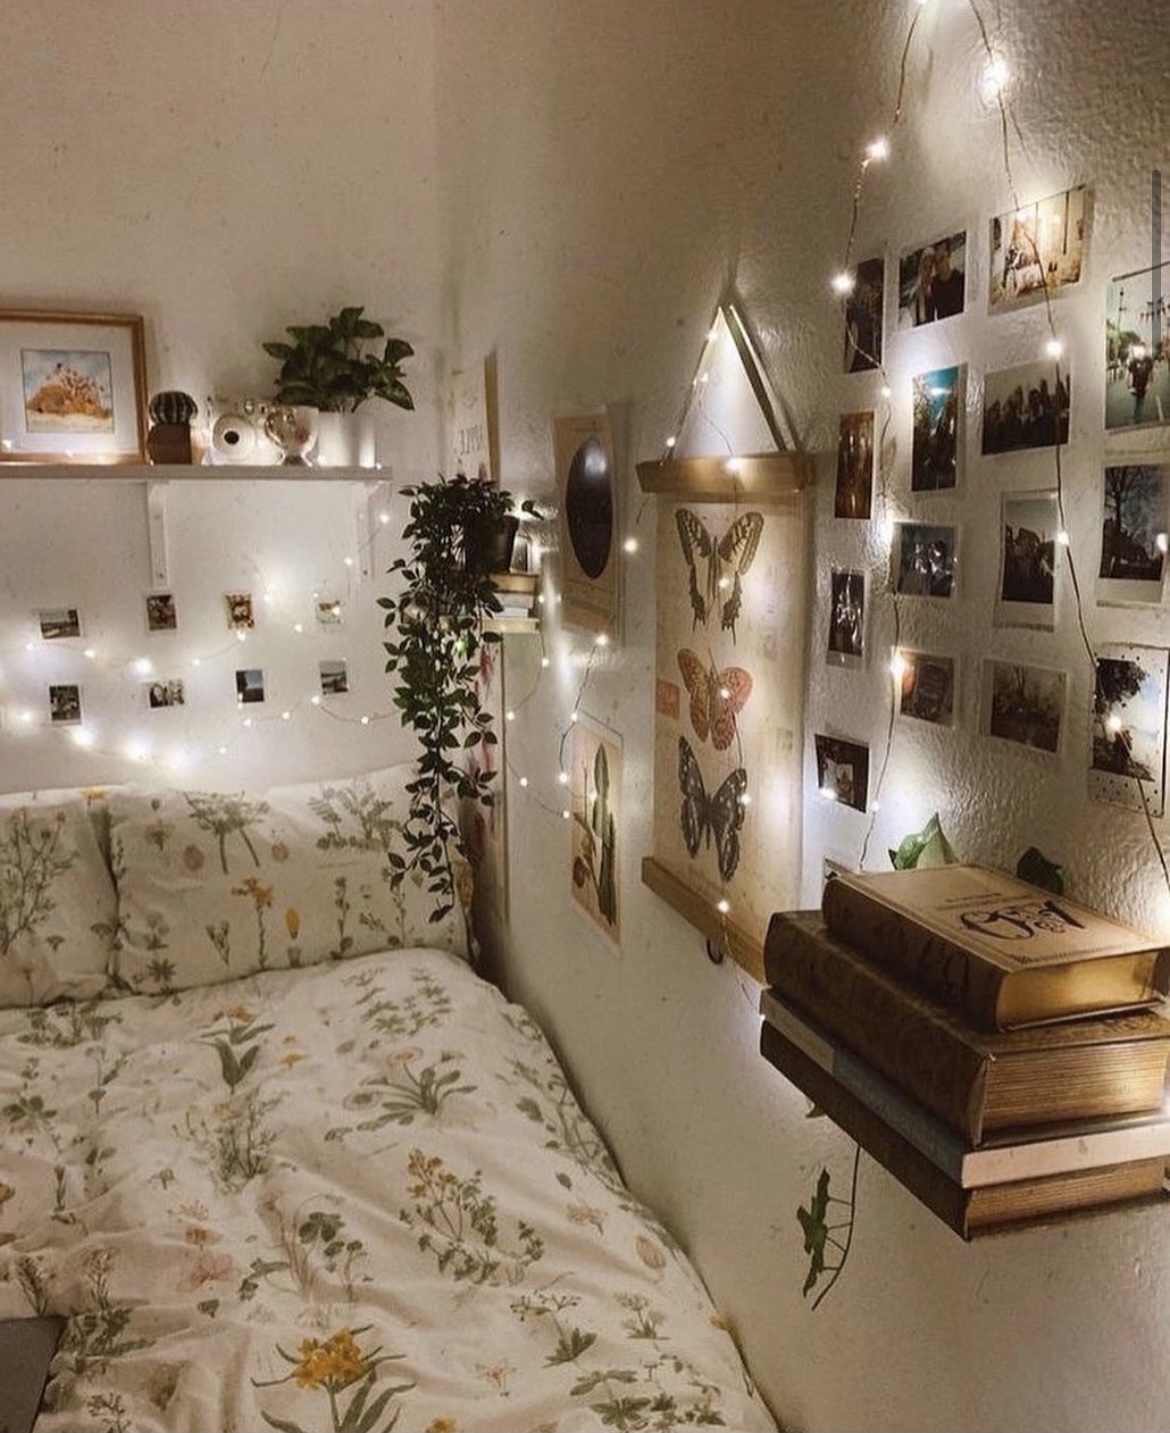 38 Best Dorm Room Ideas You Need to Replicate - atinydreamer